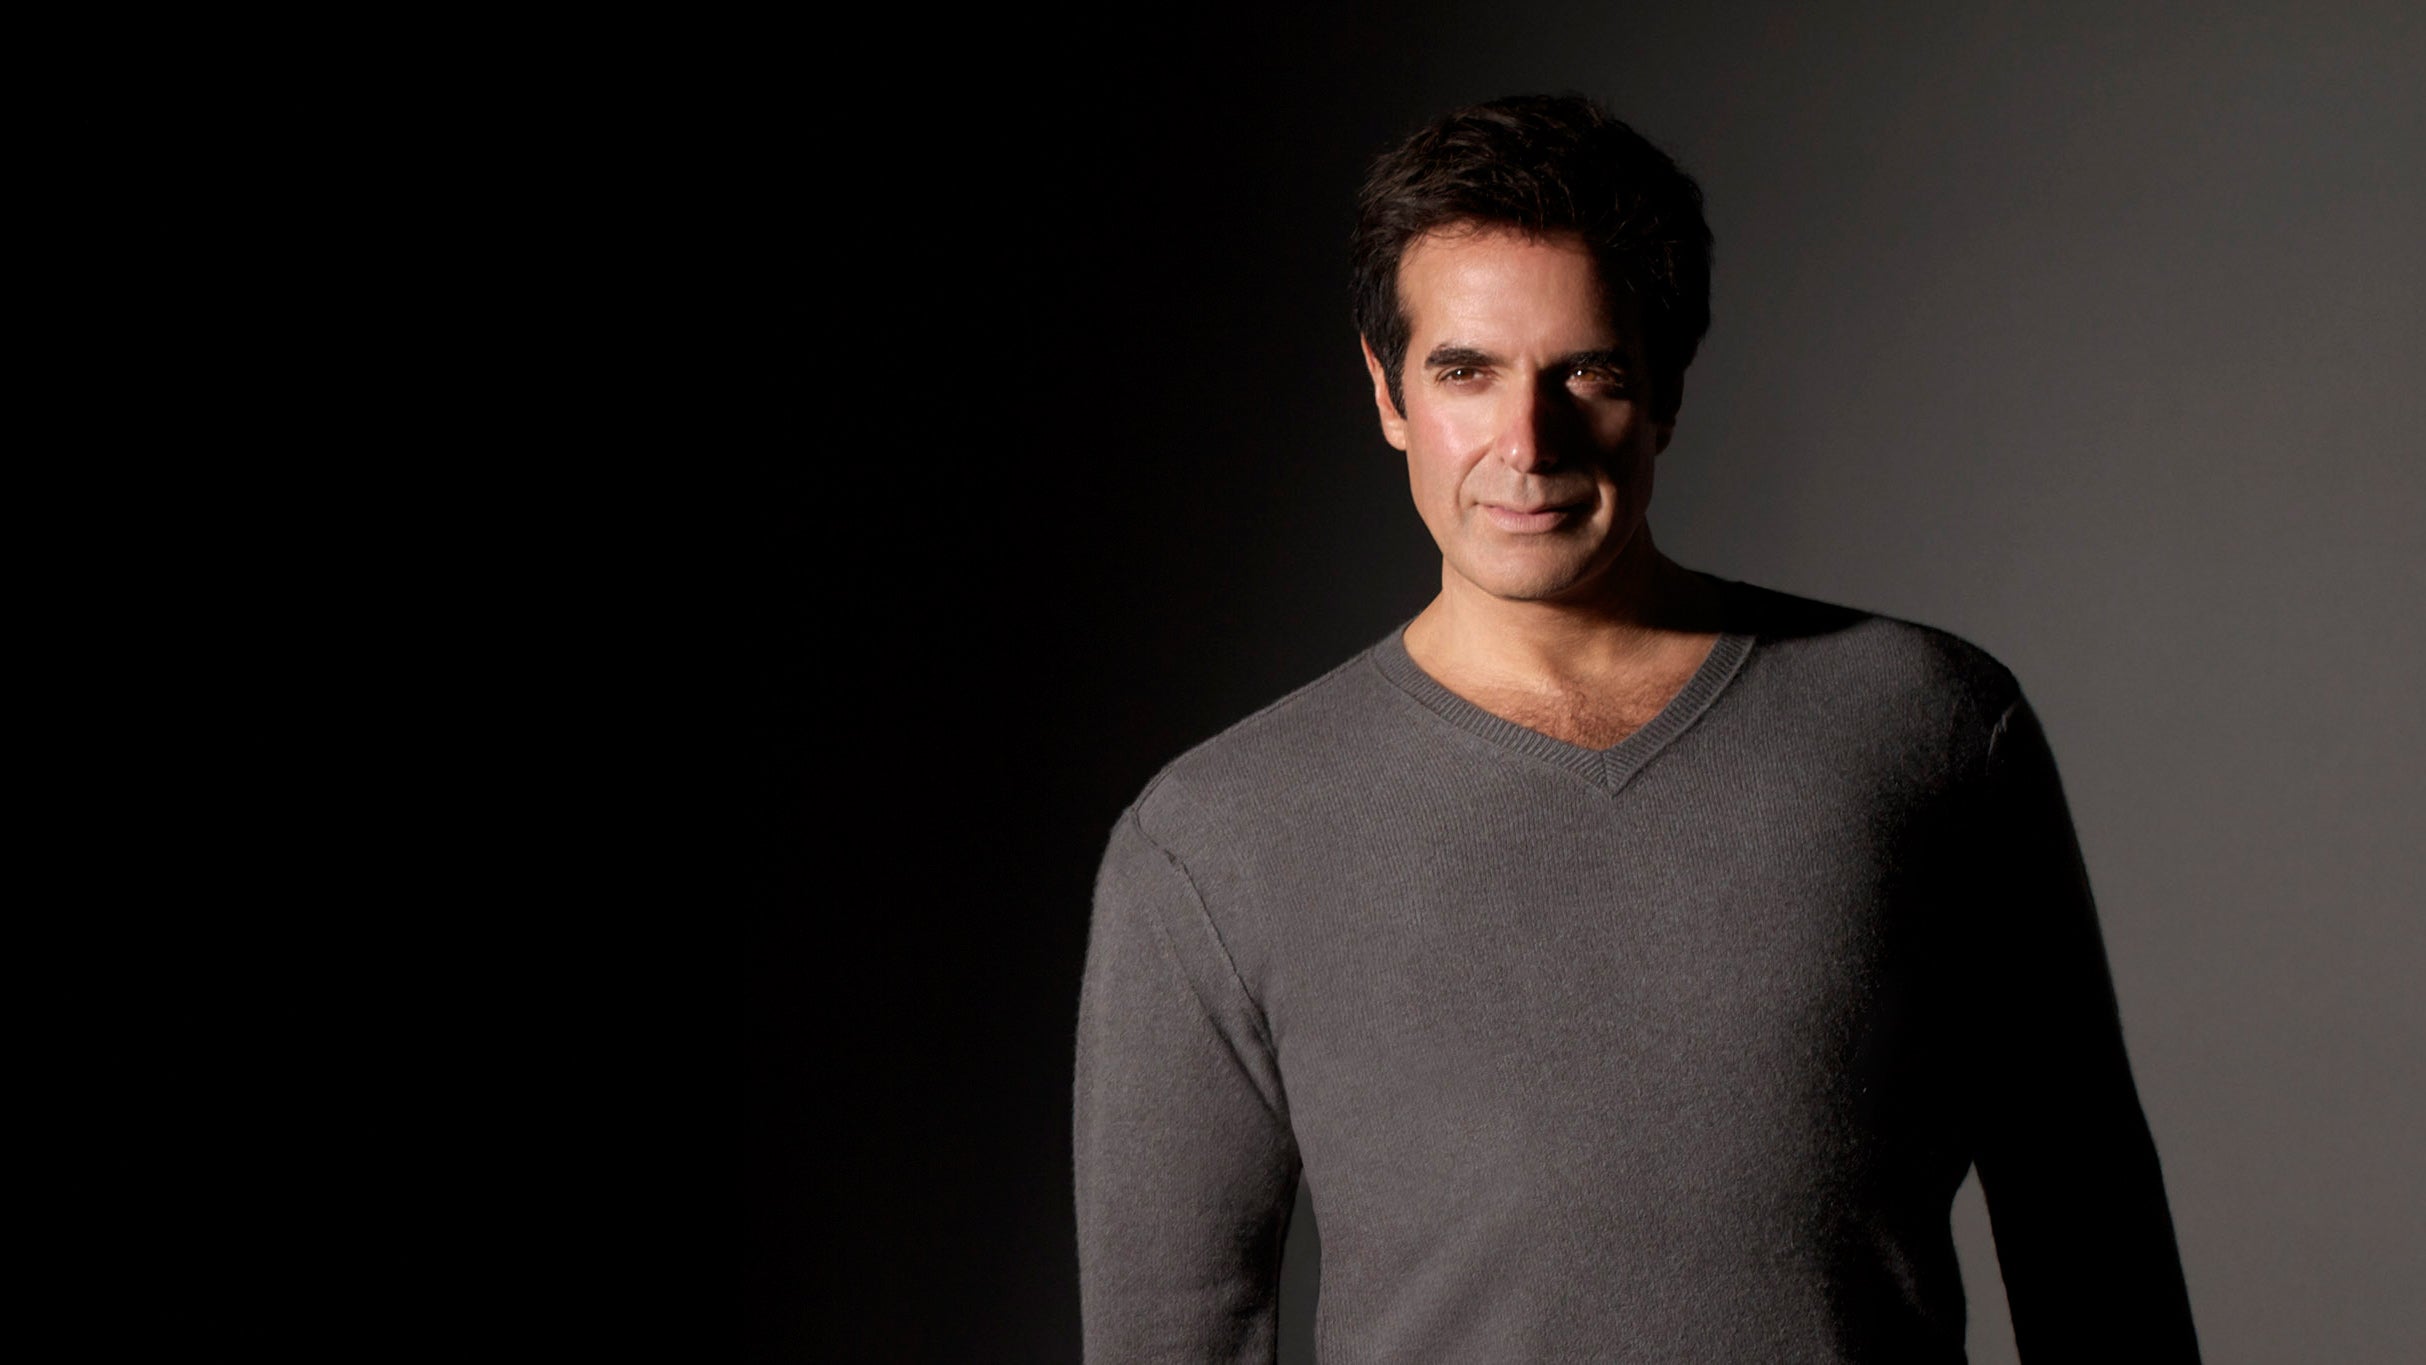 David Copperfield at David Copperfield Theater at MGM Grand Hotel and Casino – Las Vegas, NV